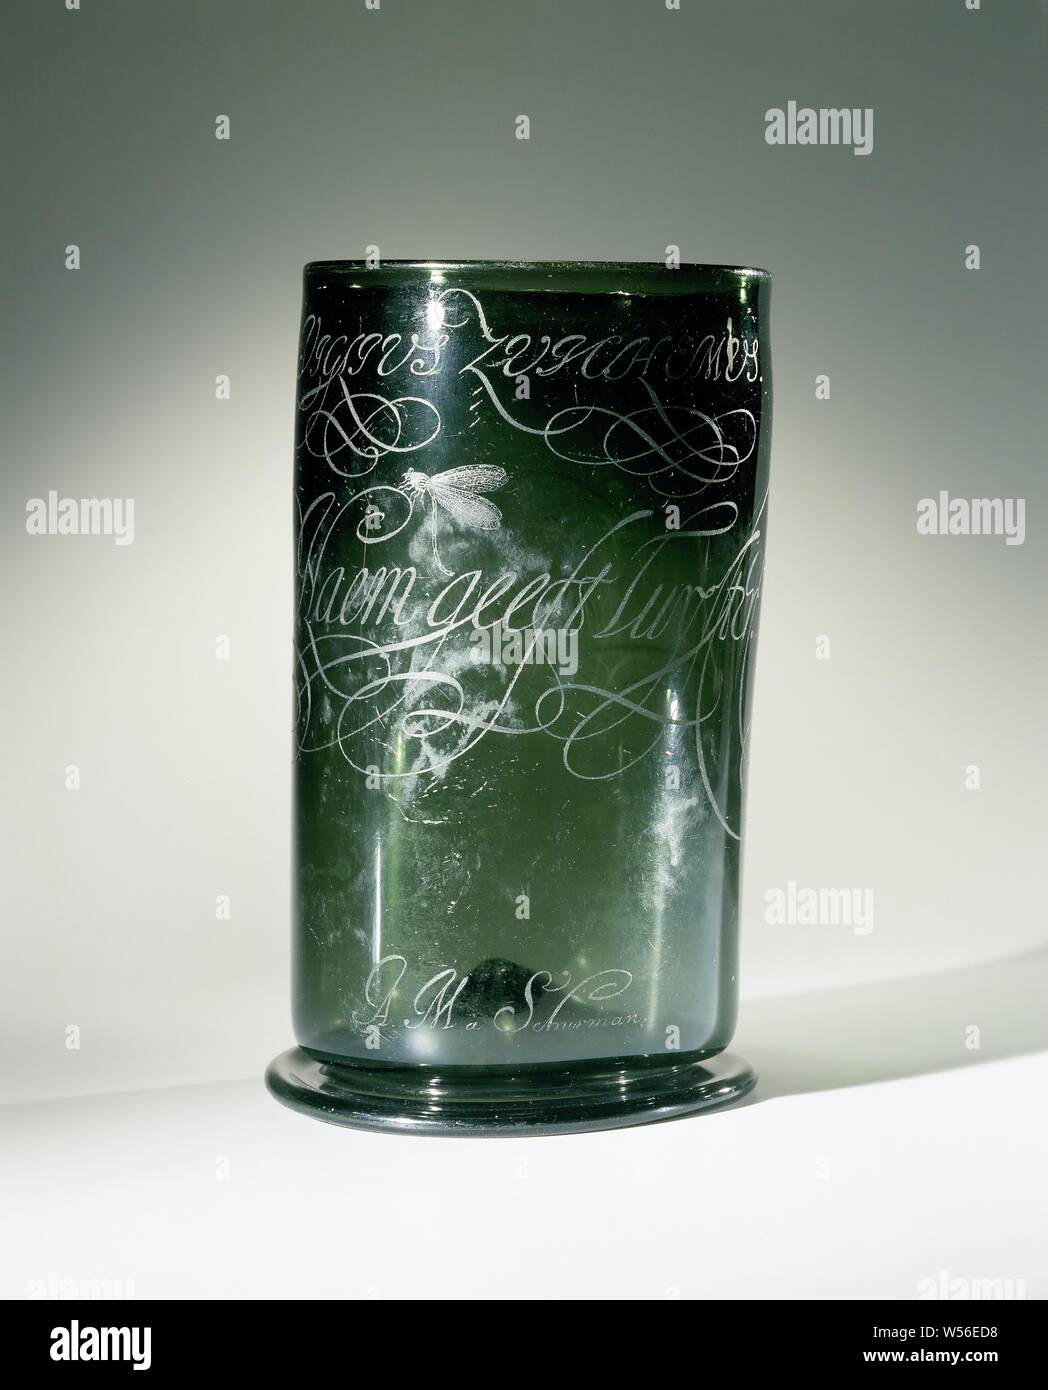 Cup with the inscription: Al schyn ick duyster De Naem gives luyster, Cup of dark green glass. Inserted soul. Smooth, hollow stand ring. On the high cylindrical body the calligraphic inscription: 'VIGLIUS ZUICHEMUS' and 'Al schyn ick duyster, De Naem gives luyster' (on the 'N' of 'Naem' a dragonfly or fly). Above the stand ring the signature 'A.M. à Schurman ', Viglius Zuichemus Ab Aytta, anonymous, c. 1500 - c. 1600 and/or c. 1630 - c. 1670, glass, glassblowing, h 20.5 cm × w 12.7 cm × d 12.5 cm d 12.3 cm Stock Photo